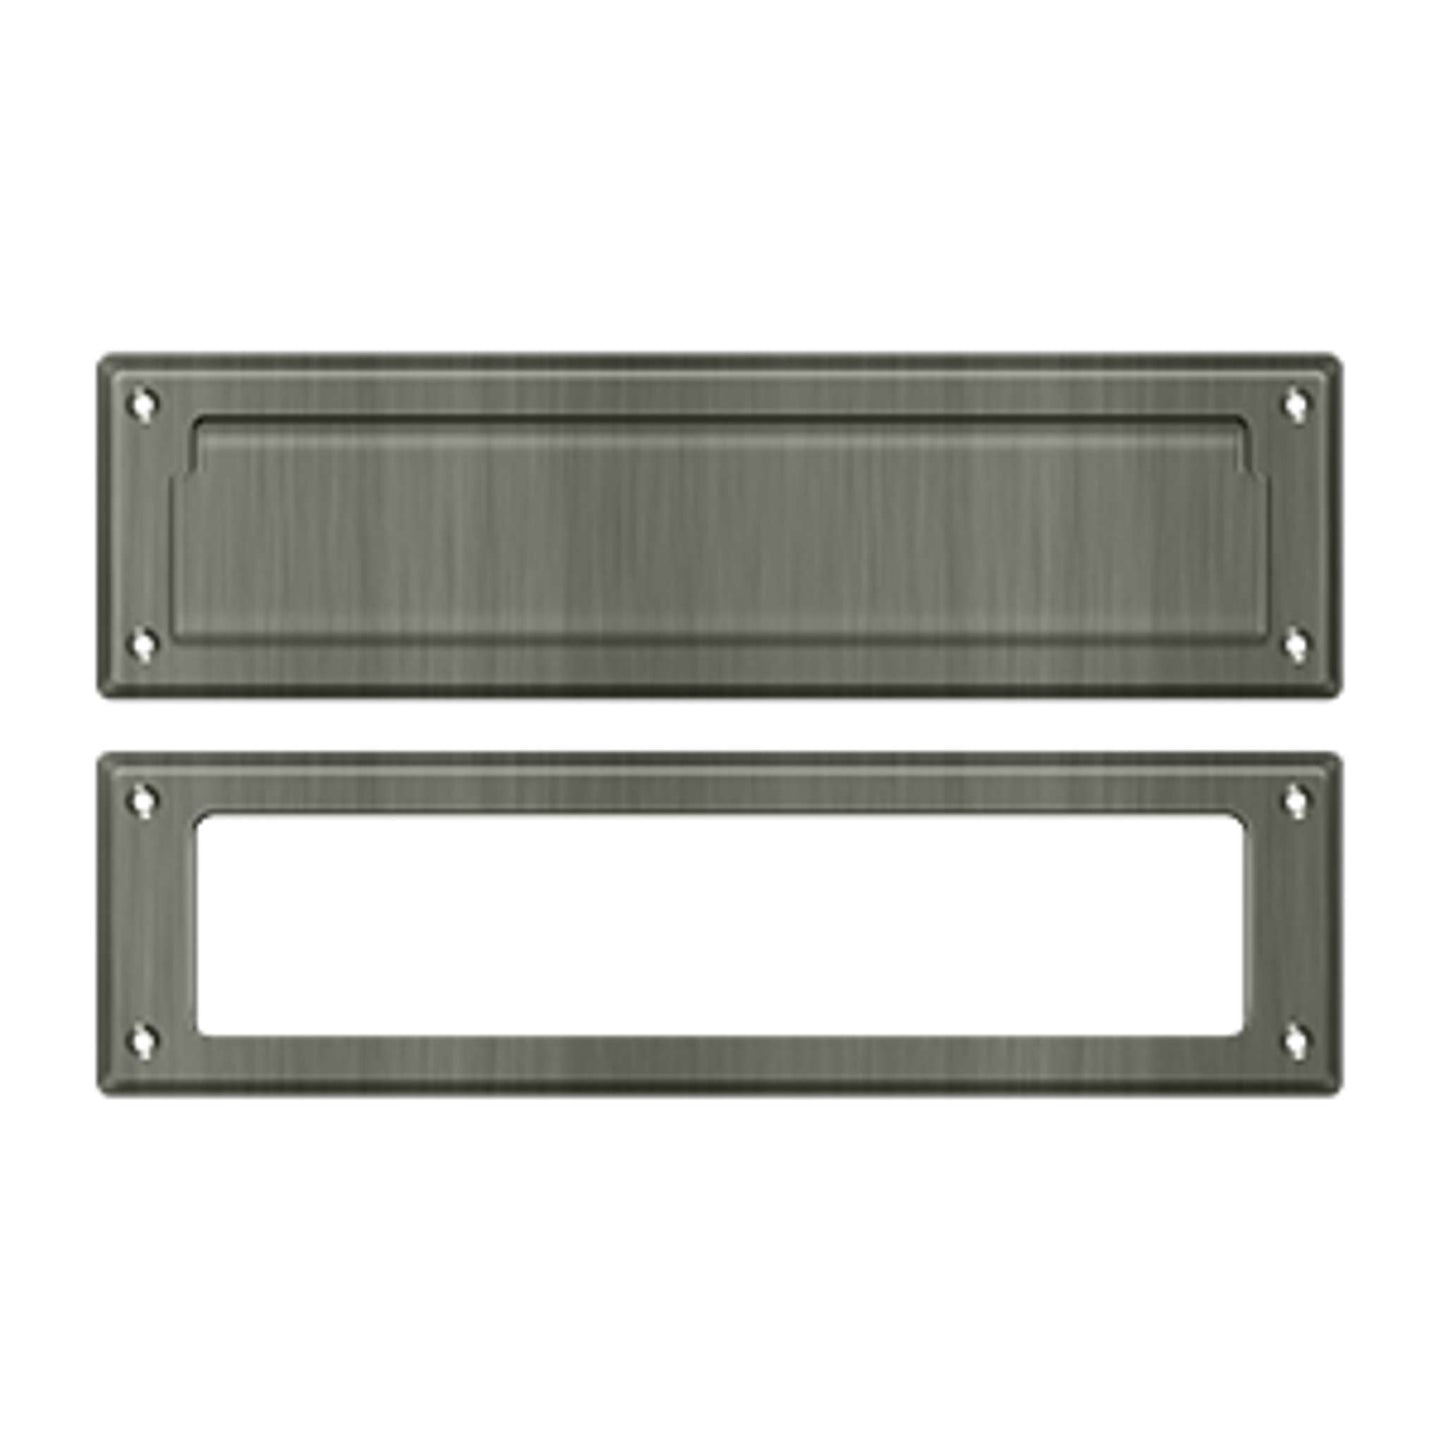 Deltana - Mail Slot 13-1/8" with Interior Frame